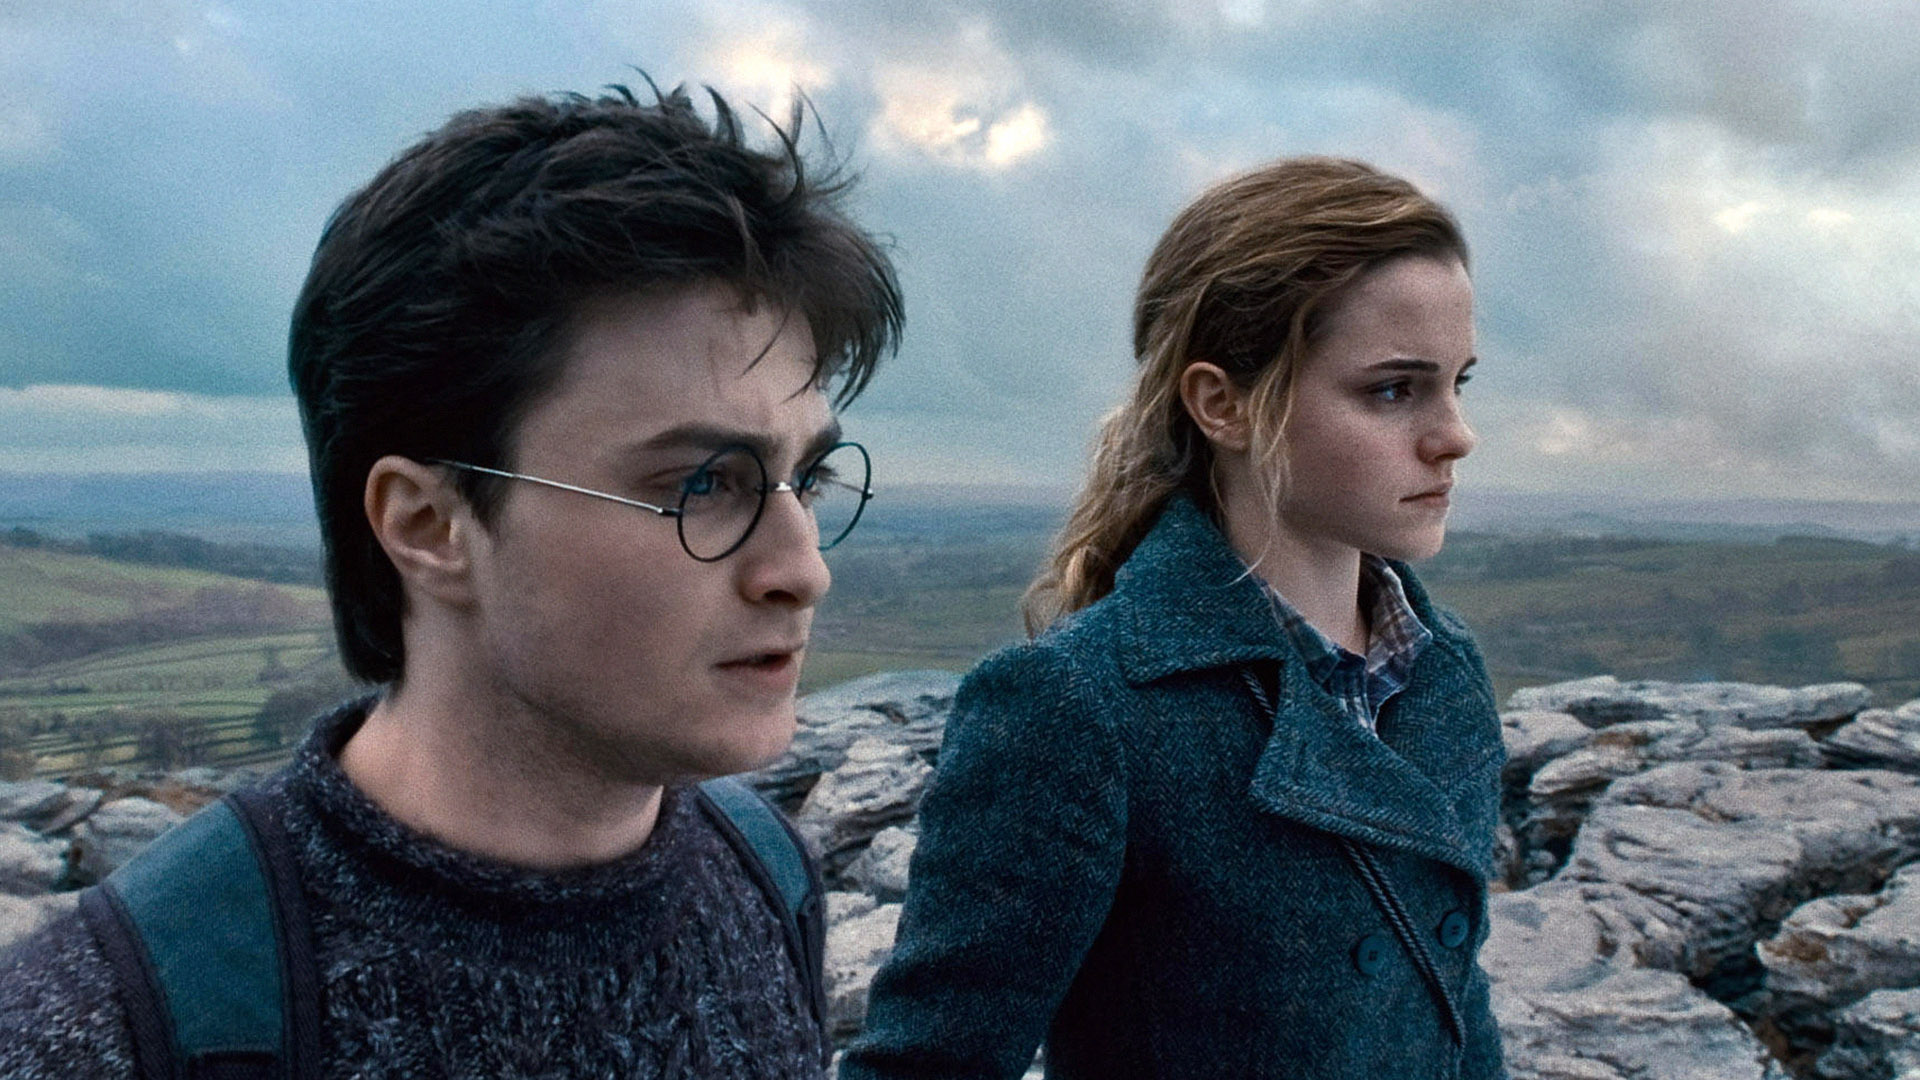 One Small Harry Potter Movie Change Doomed Hermione's Parents